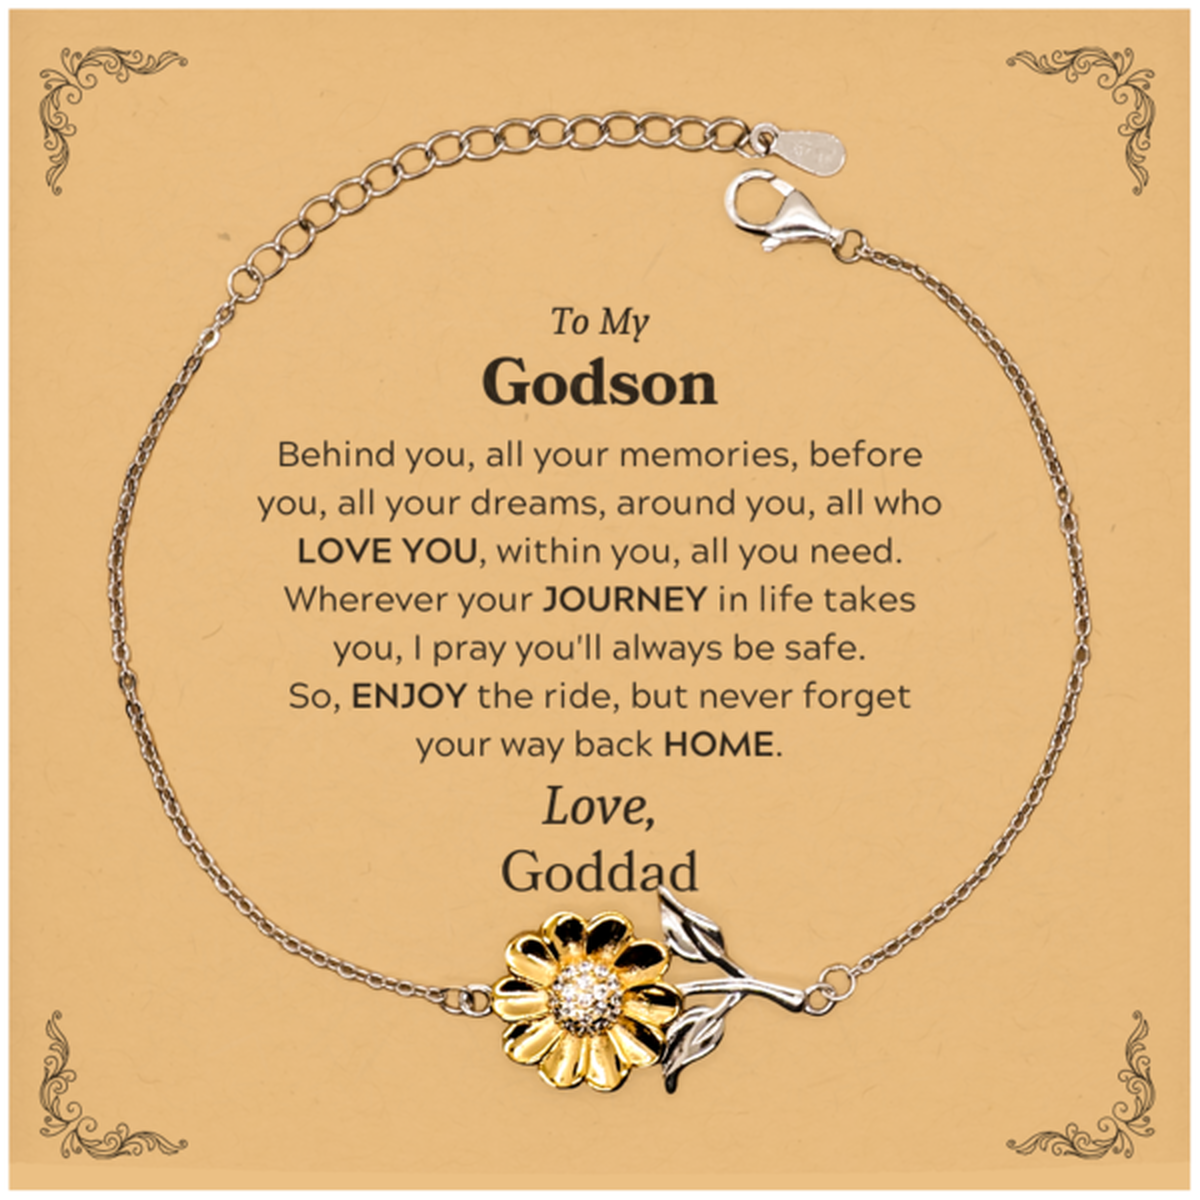 To My Godson Graduation Gifts from Goddad, Godson Sunflower Bracelet Christmas Birthday Gifts for Godson Behind you, all your memories, before you, all your dreams. Love, Goddad